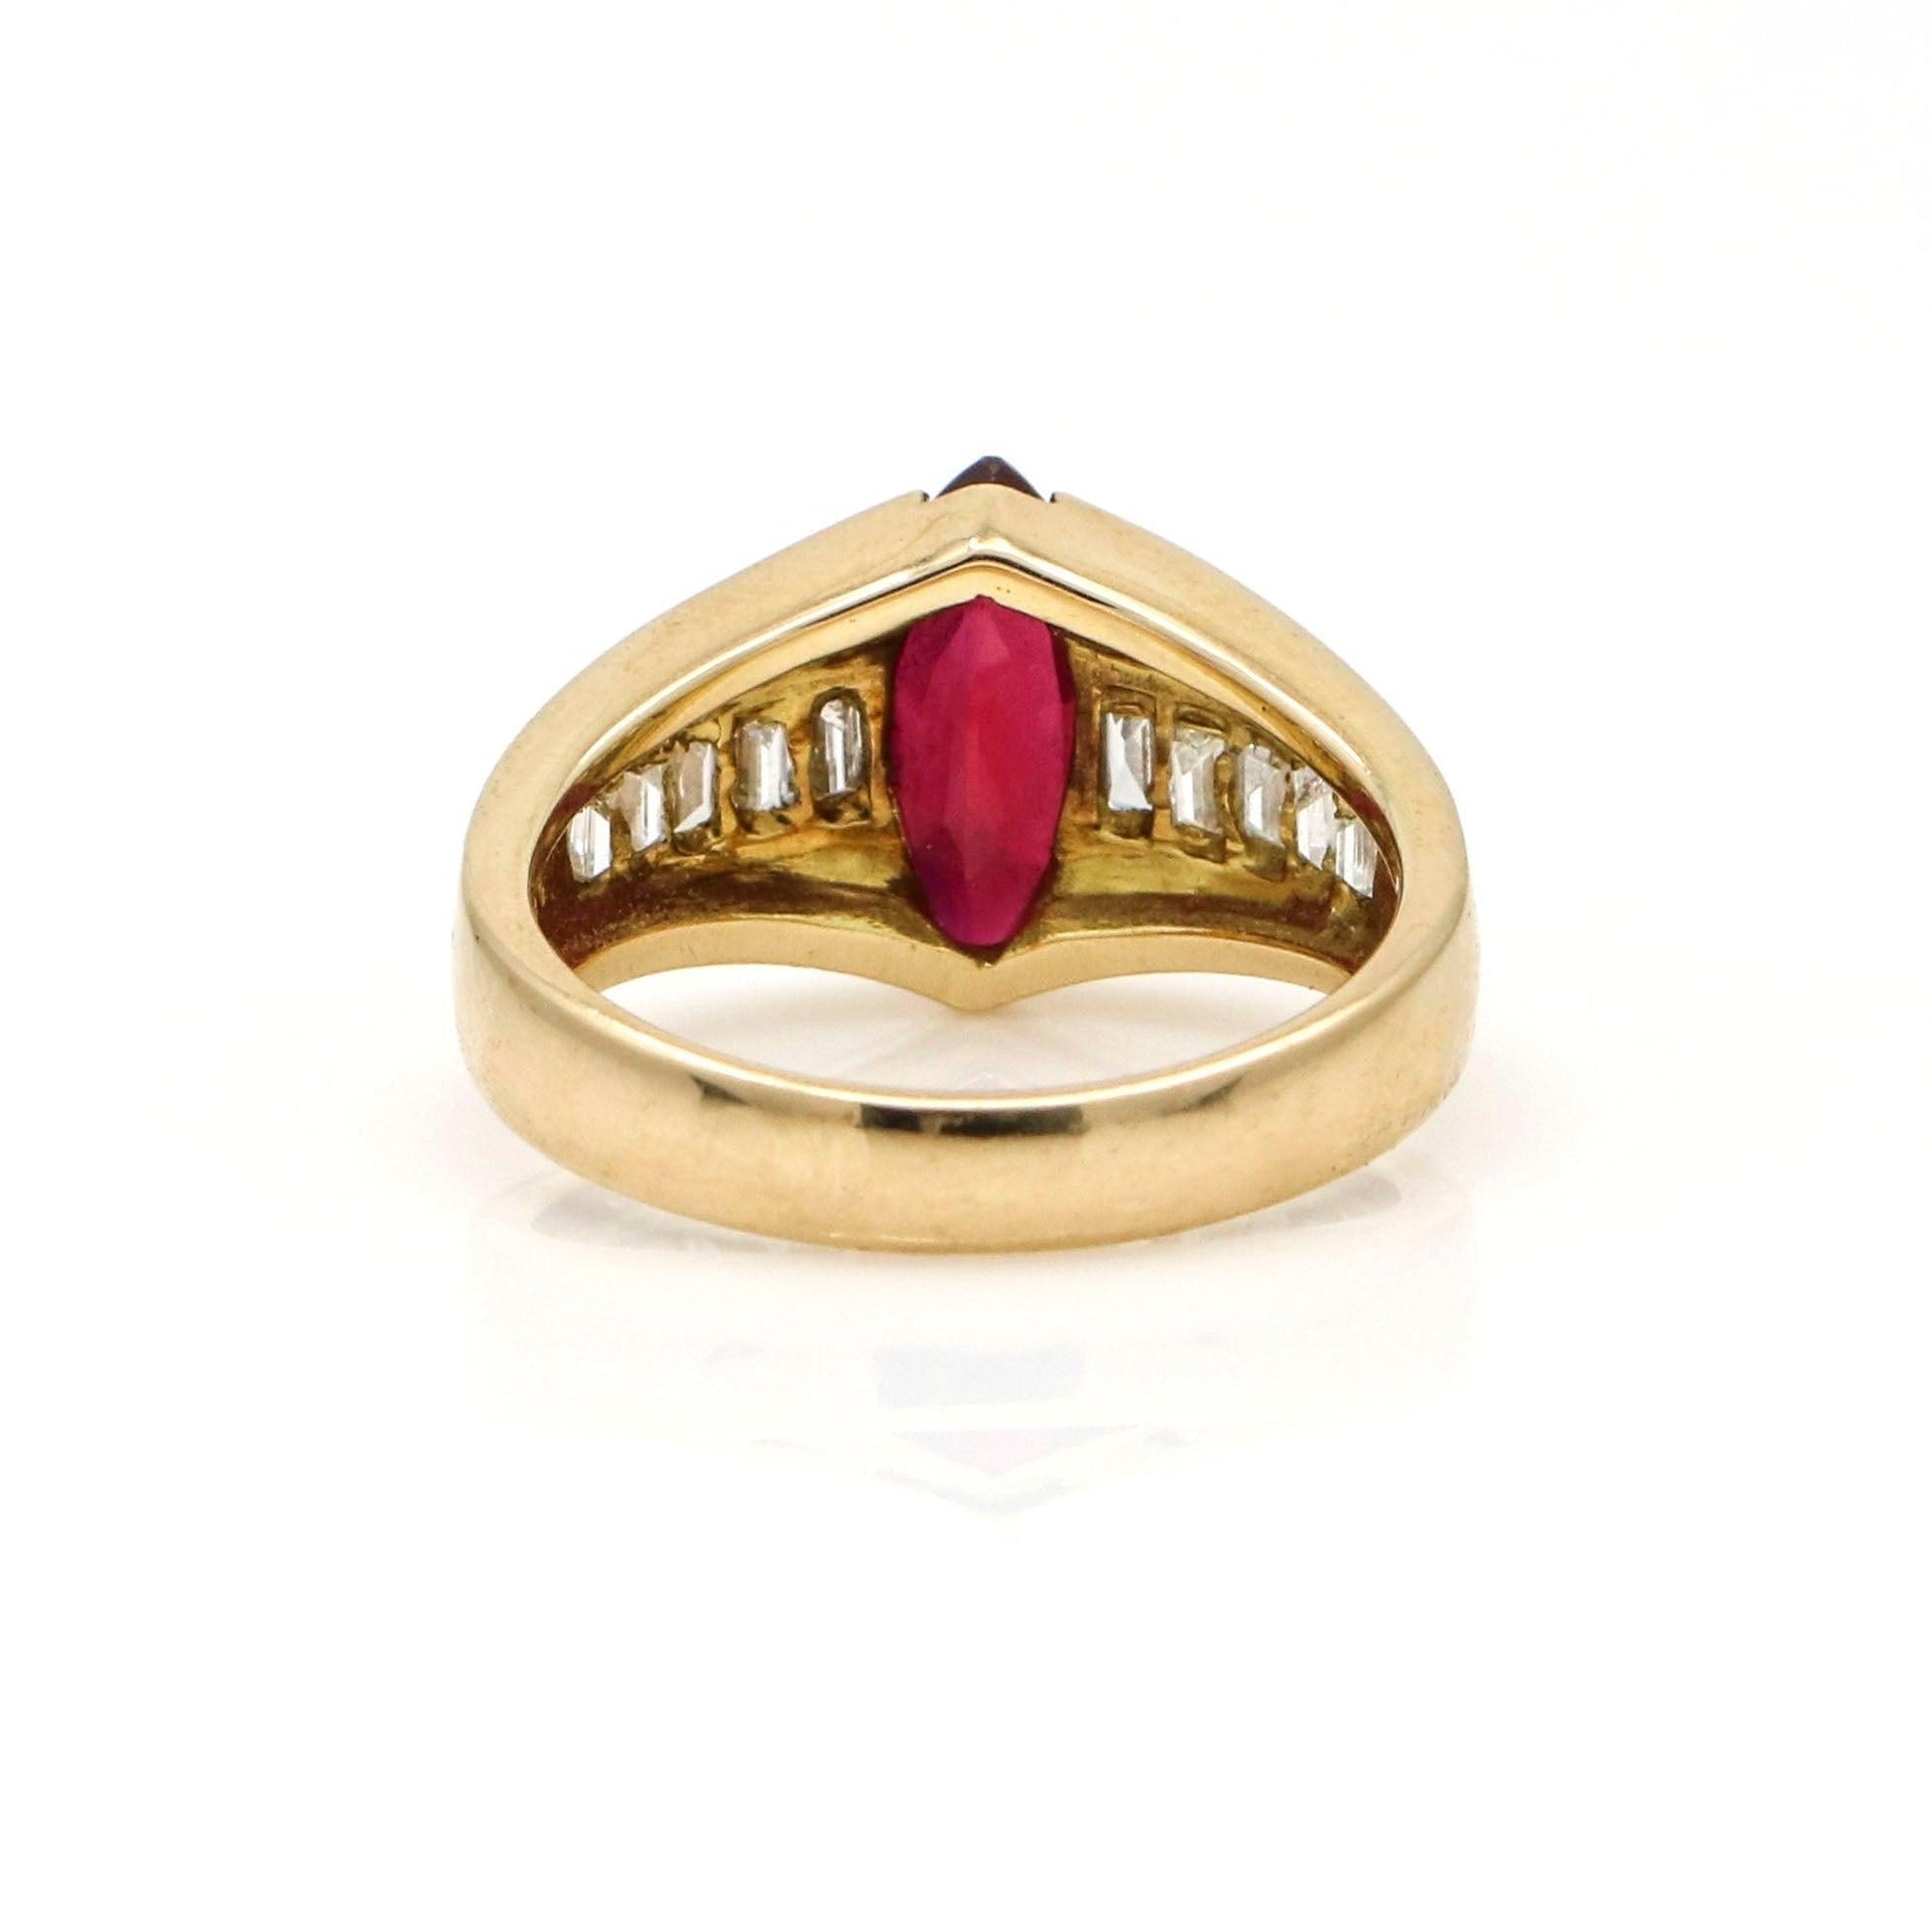 Women's Marquise Ruby and Diamond Statement Ring in 18k Yellow Gold - 31 Jewels Inc.